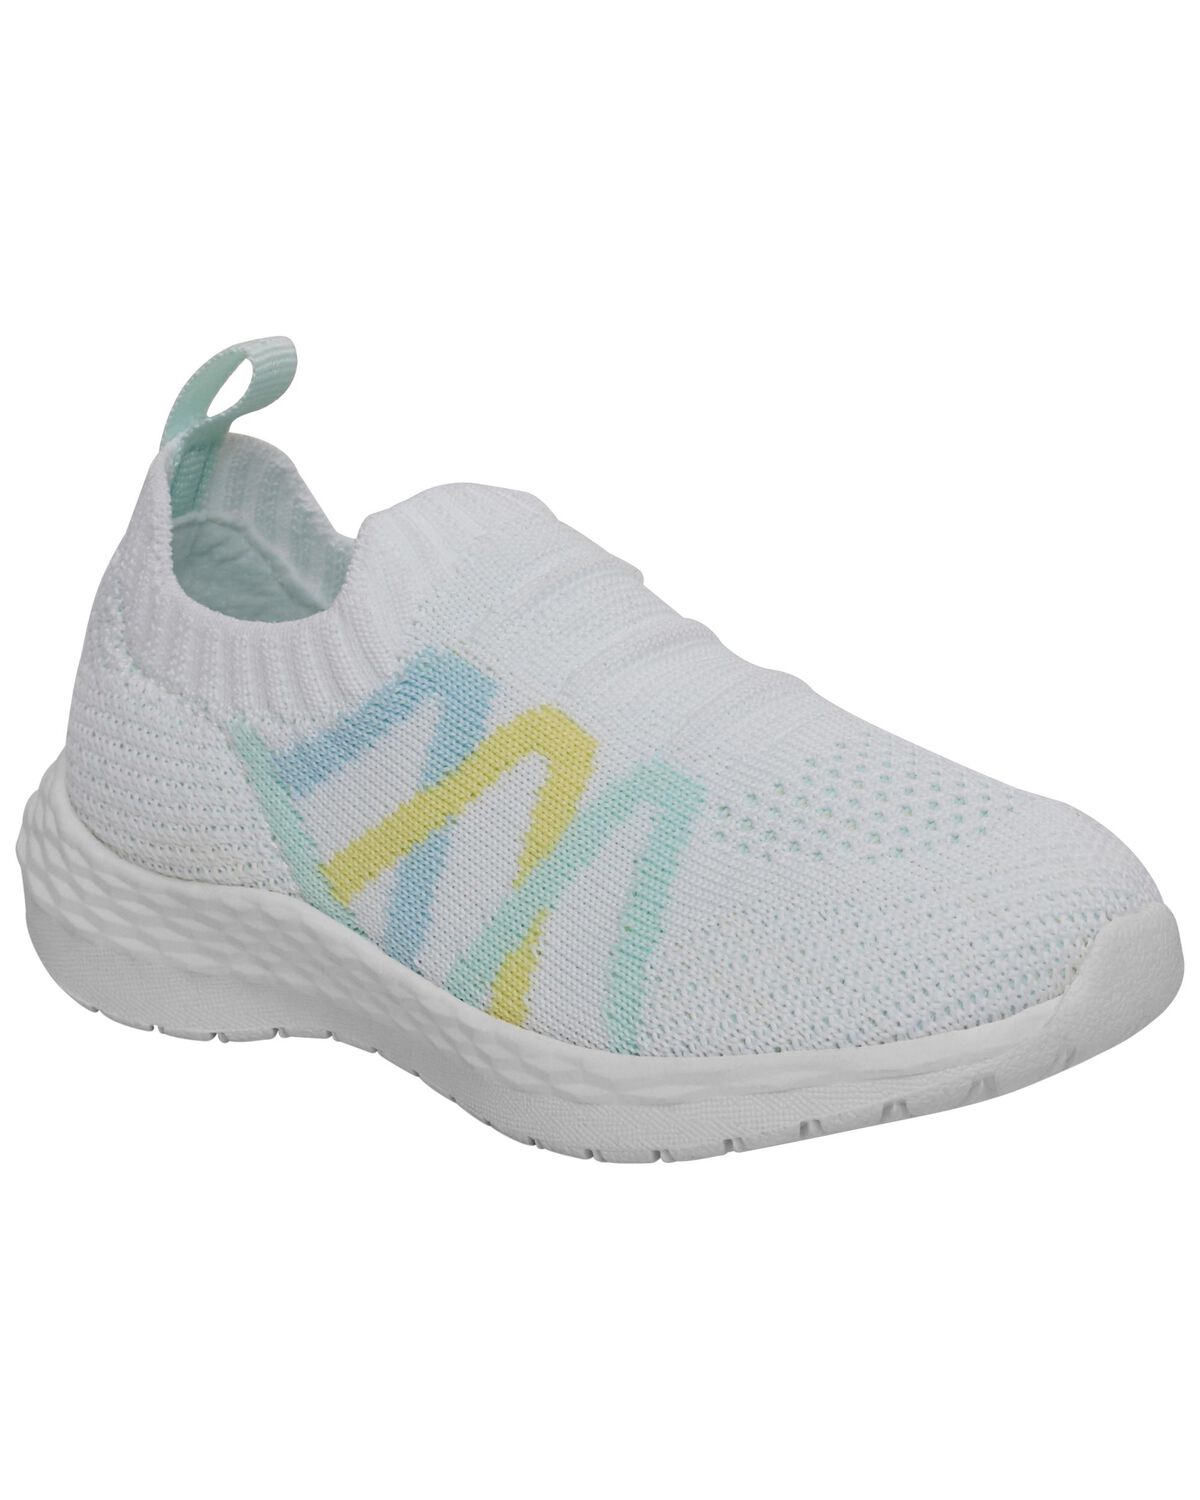 White Toddler Athletic Sneakers | carters.com